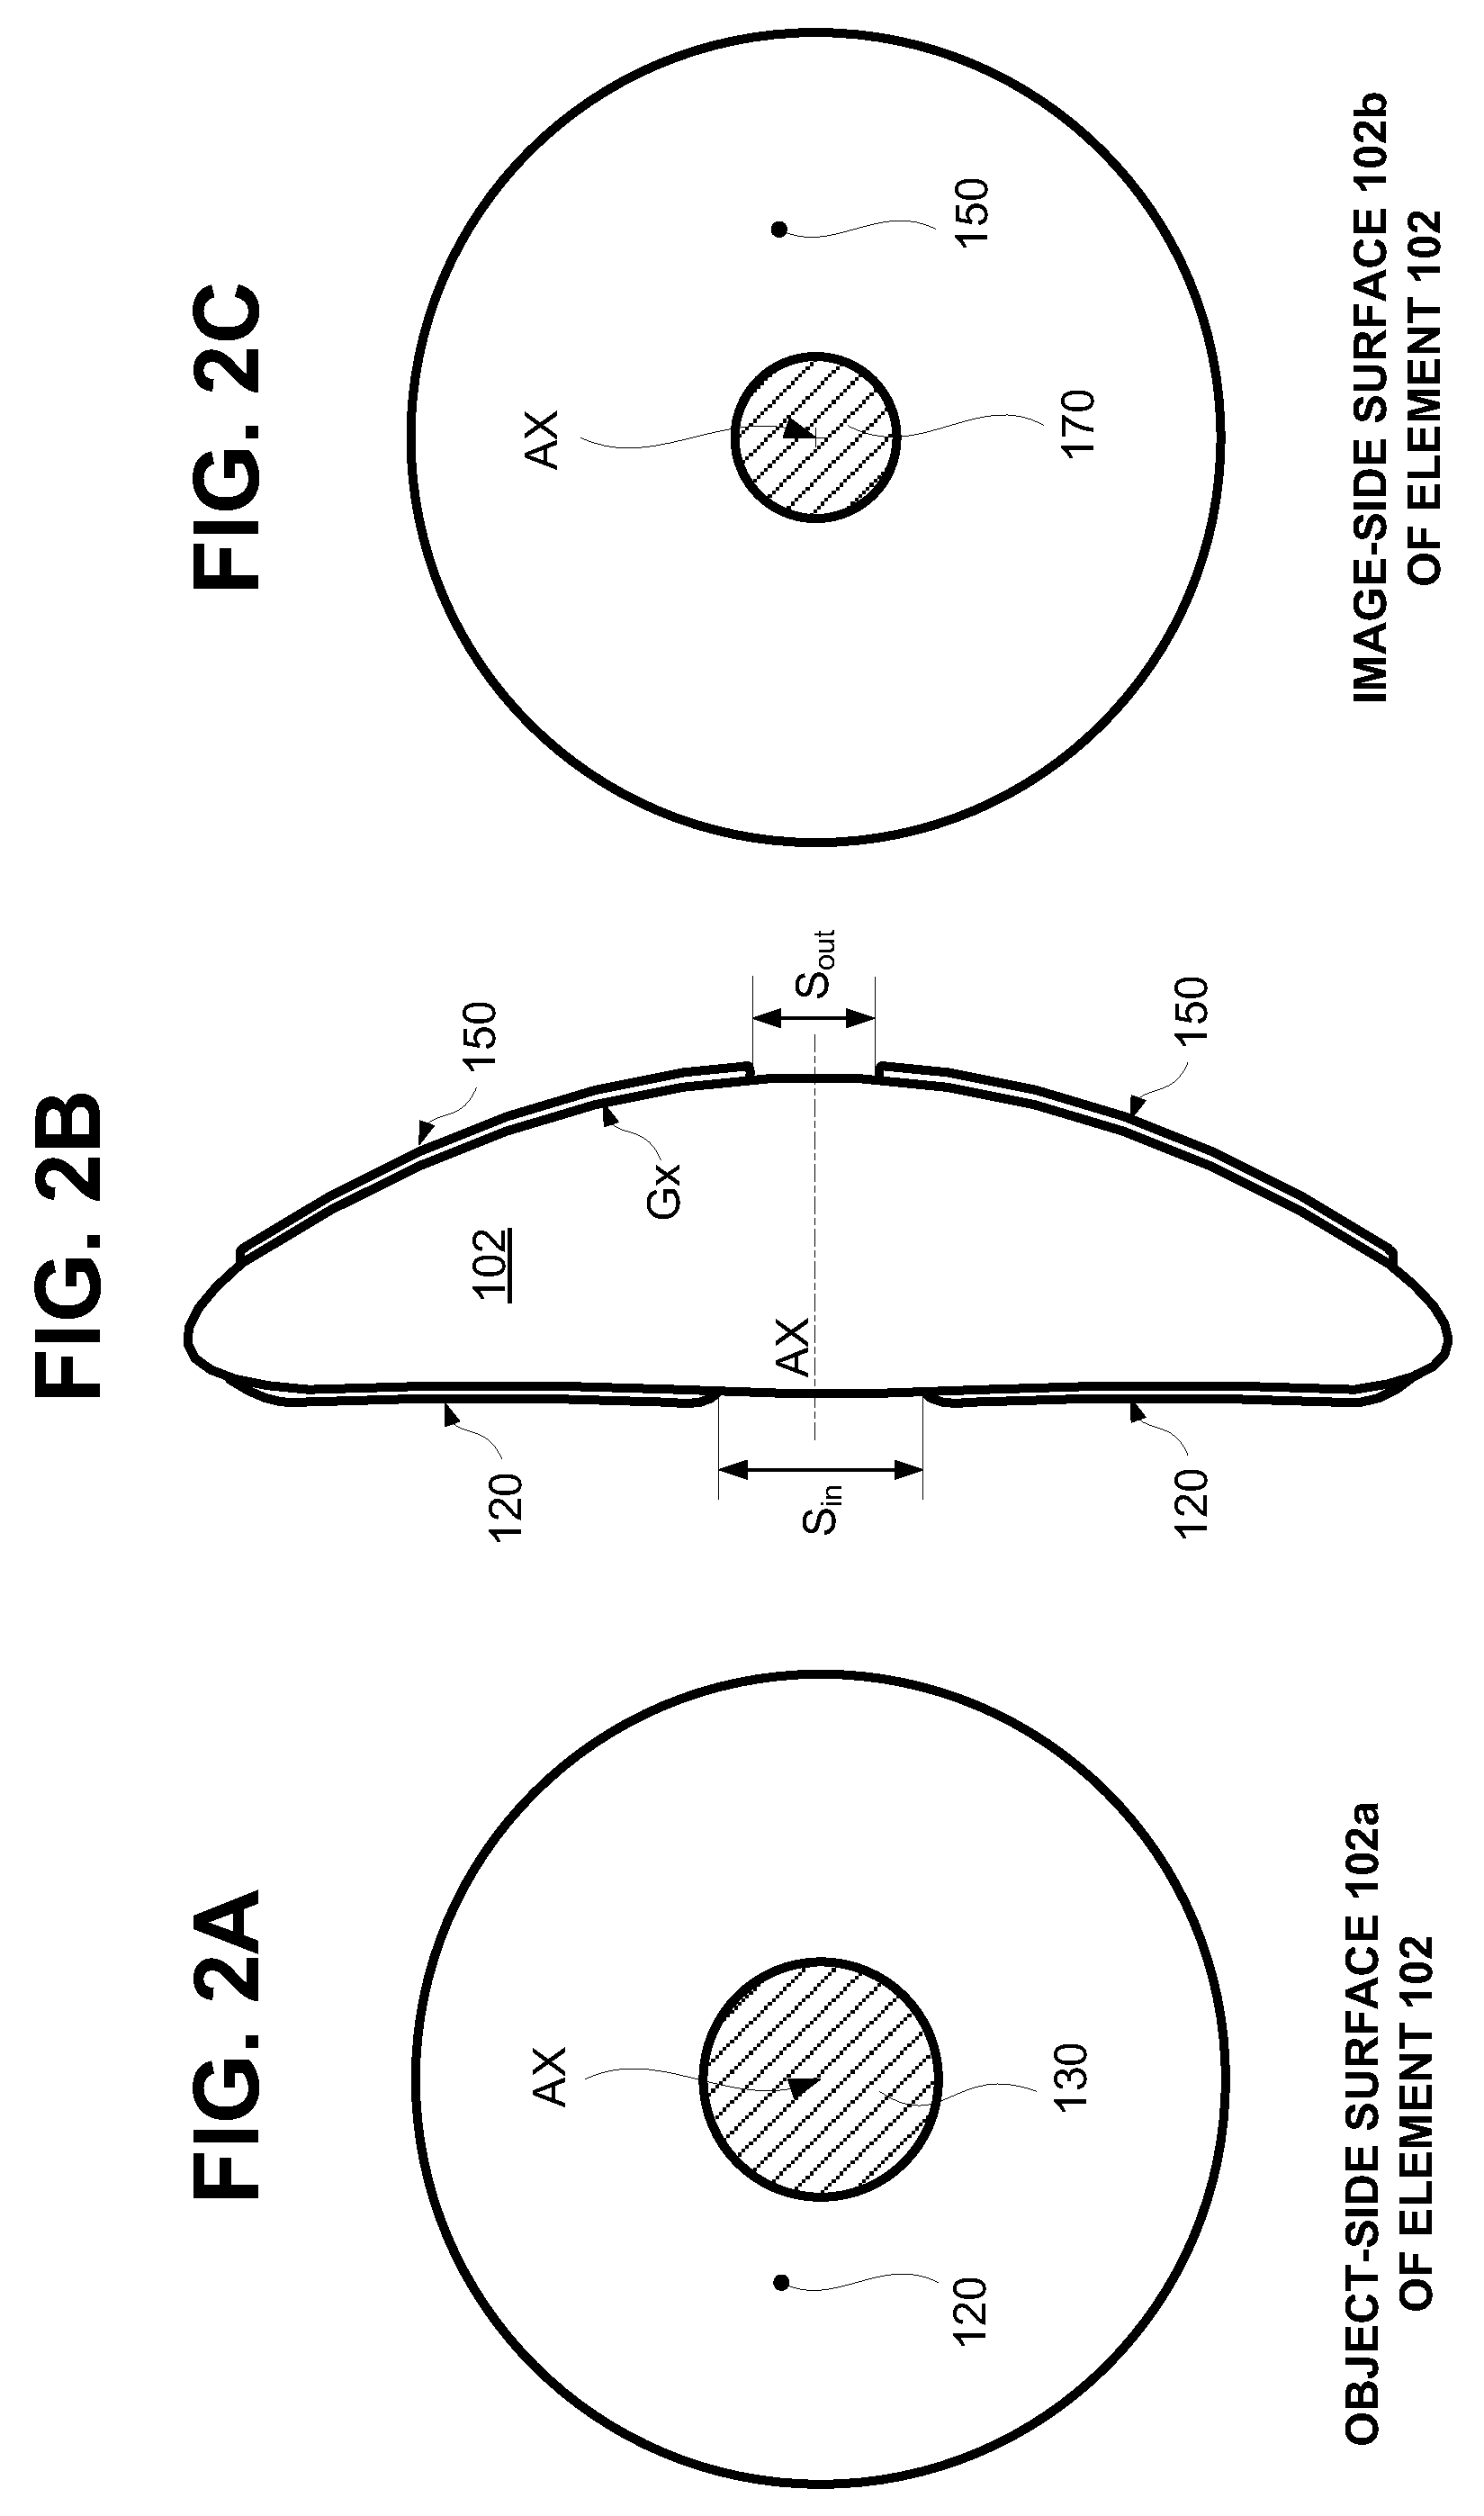 Catadioptric optical system with multi-reflection element for high numerical aperture imaging